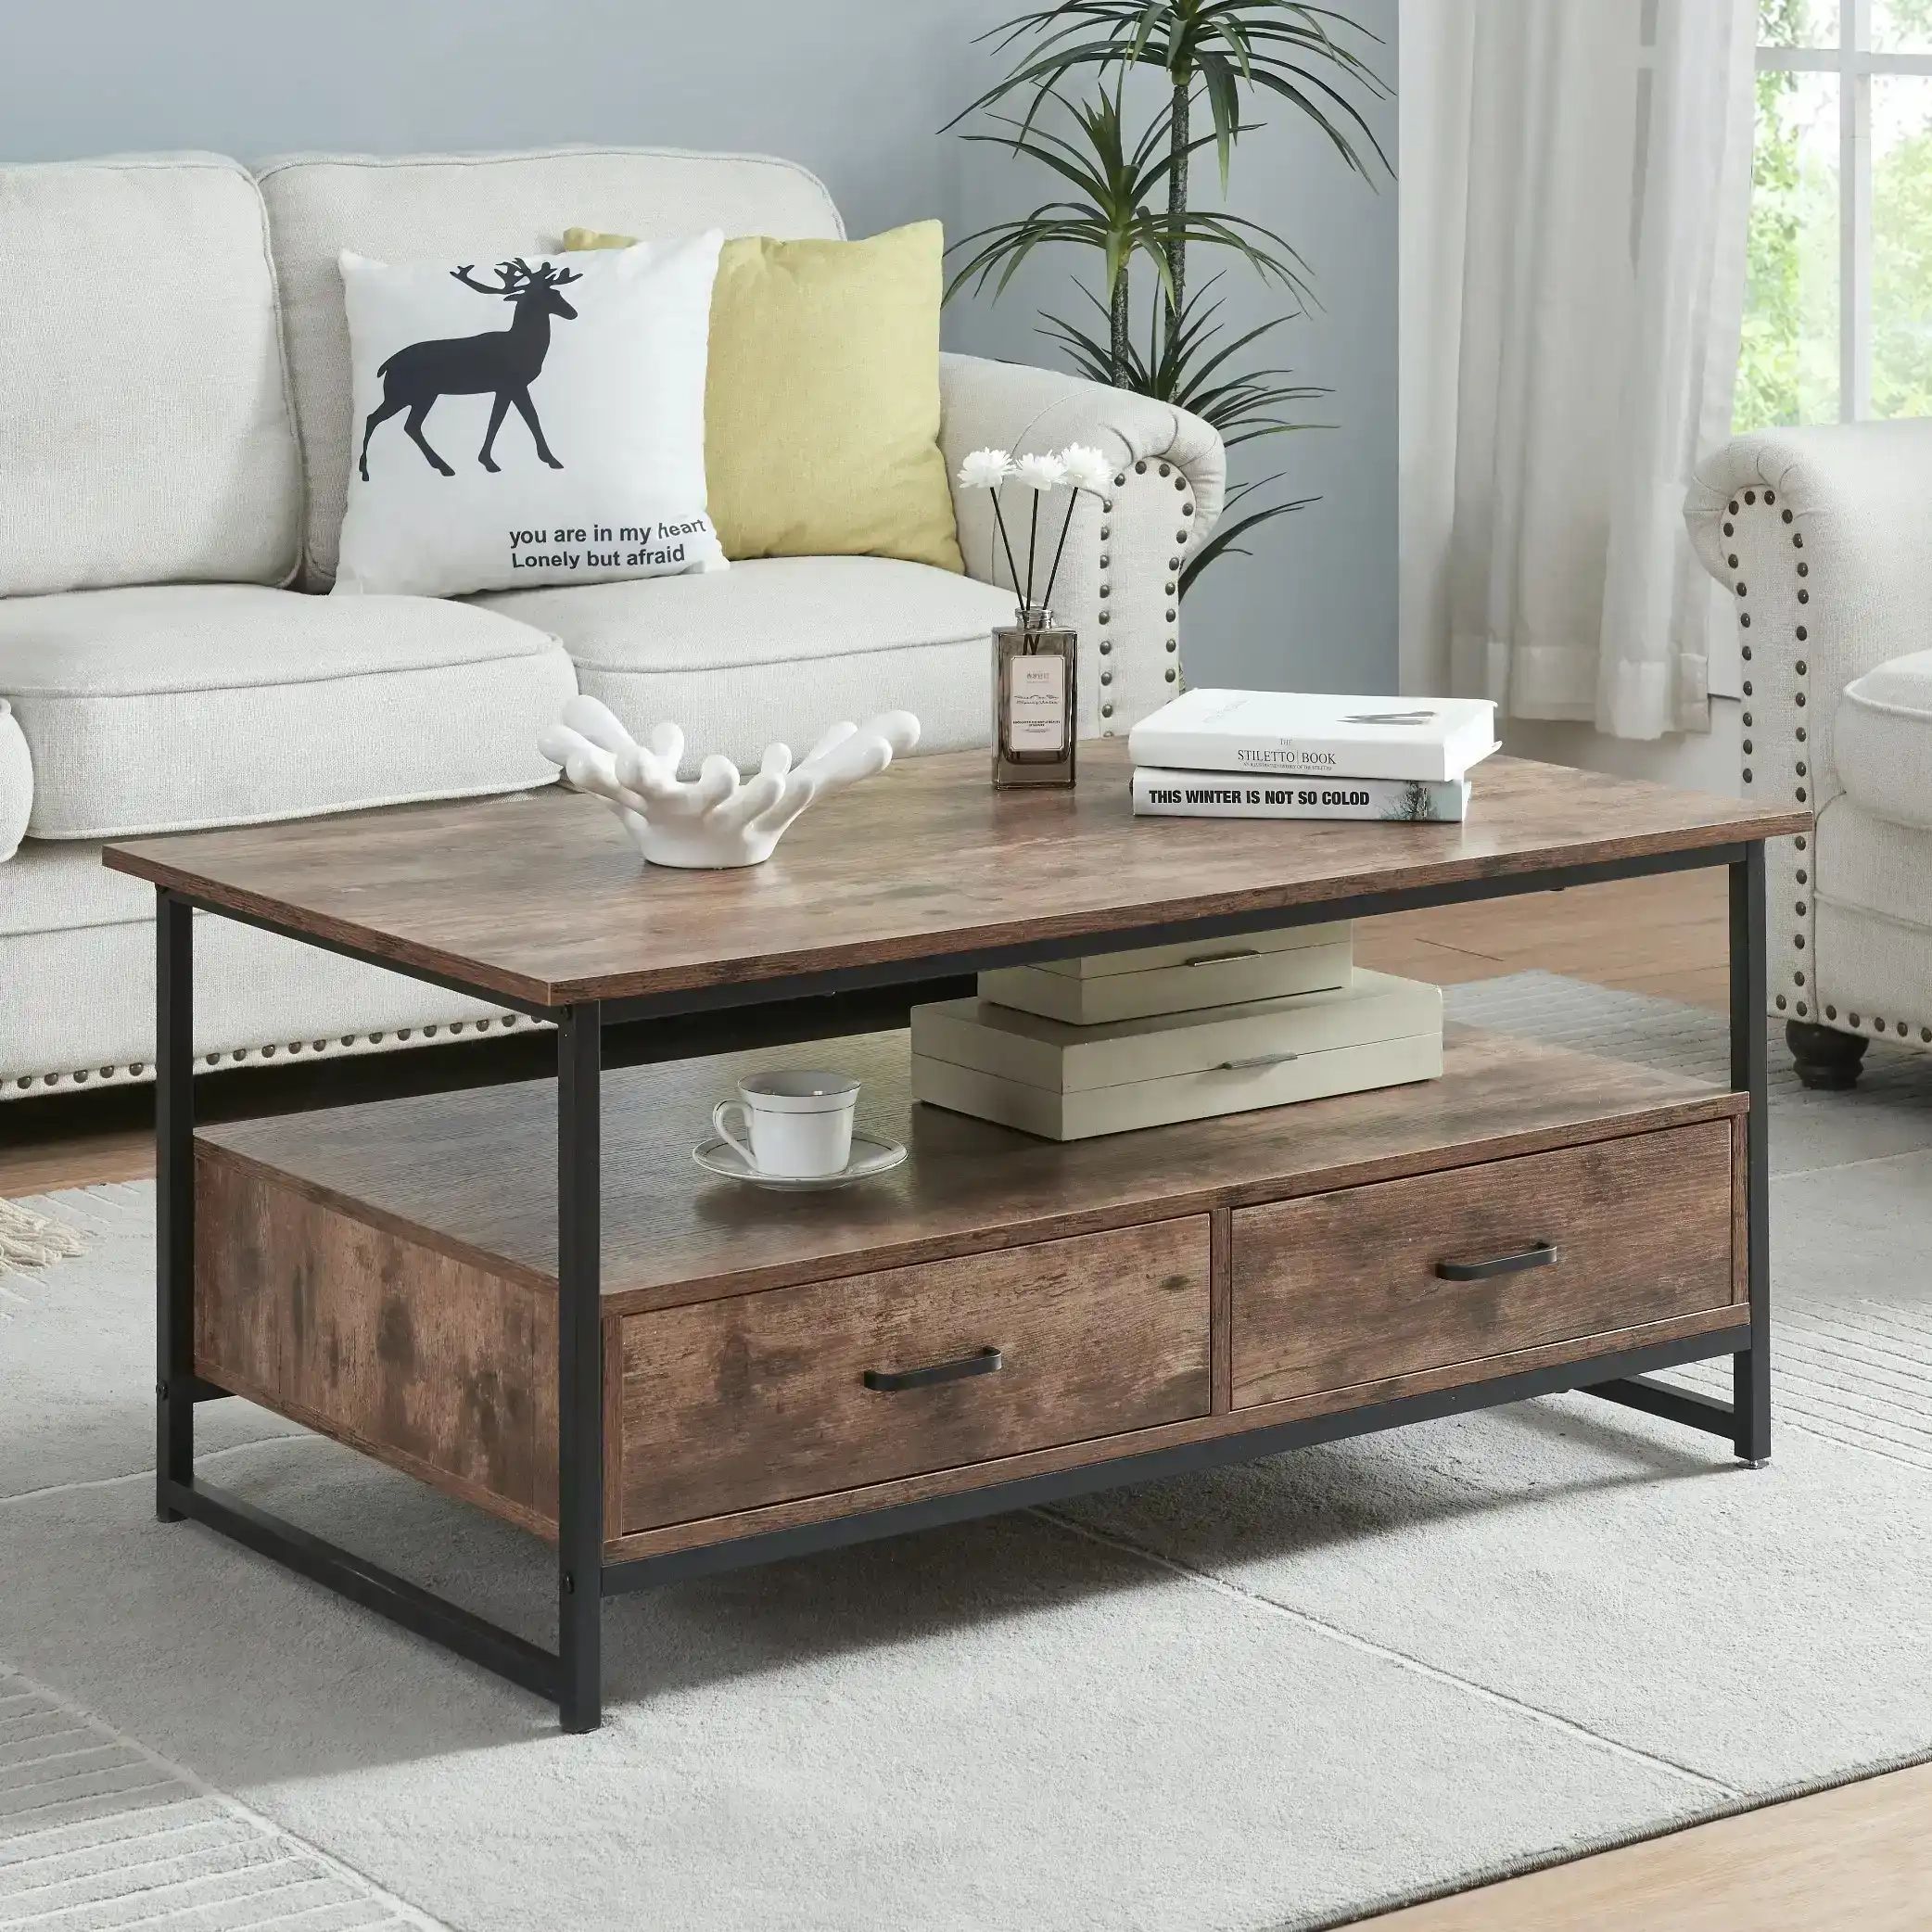 Hliving Rectangular Farmhouse Coffee Table With Open Storage Shelves And 2  Drawers,rustic Brown | C&p Decoway | Lasoo Pertaining To Coffee Tables With Open Storage Shelves (View 5 of 15)